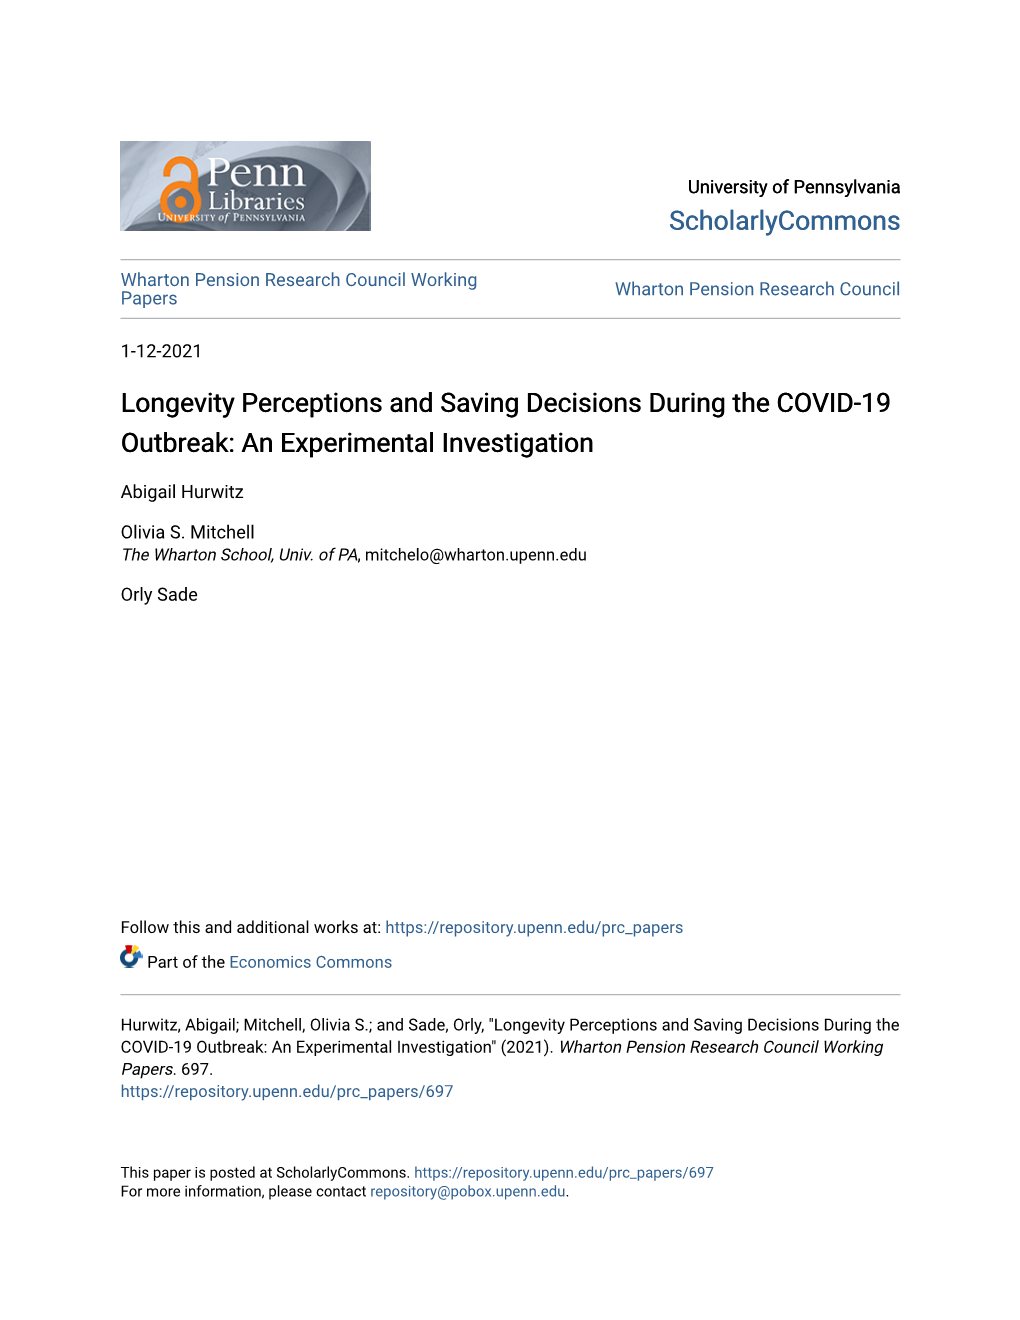 Longevity Perceptions and Saving Decisions During the COVID-19 Outbreak: an Experimental Investigation